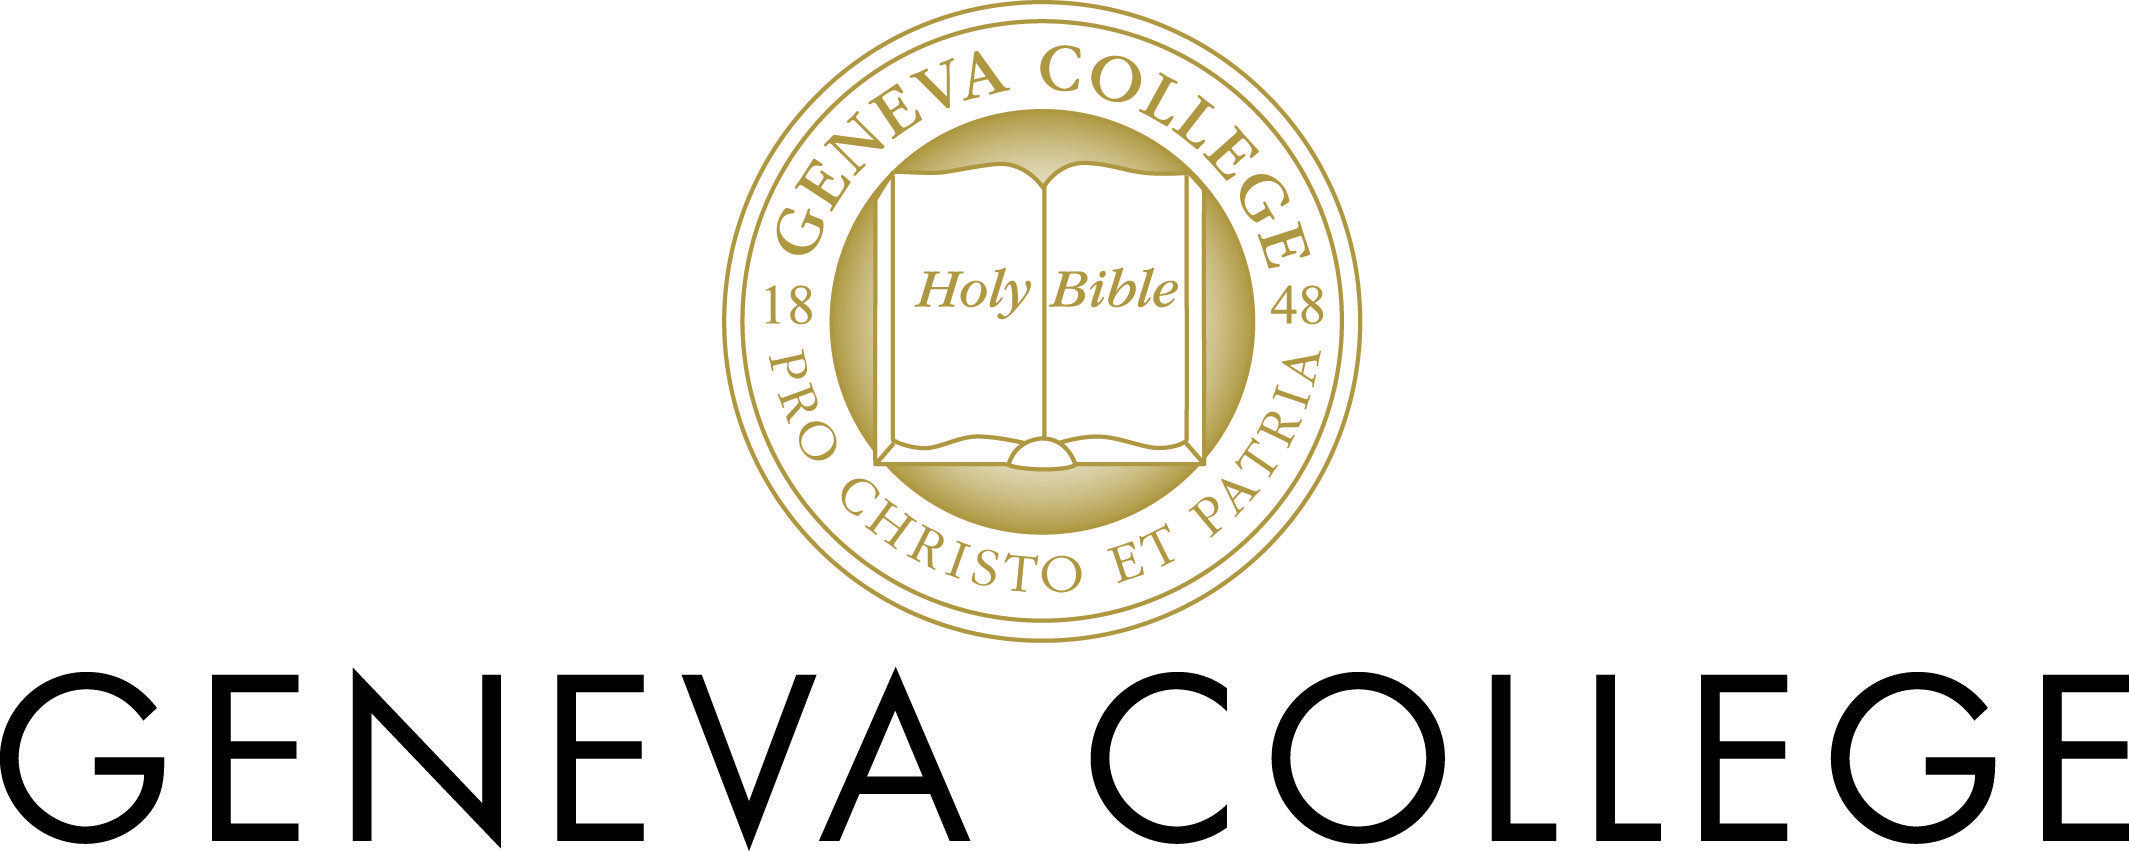 Well Known College Logo - Geneva College is a well known, well respected Christian College in ...